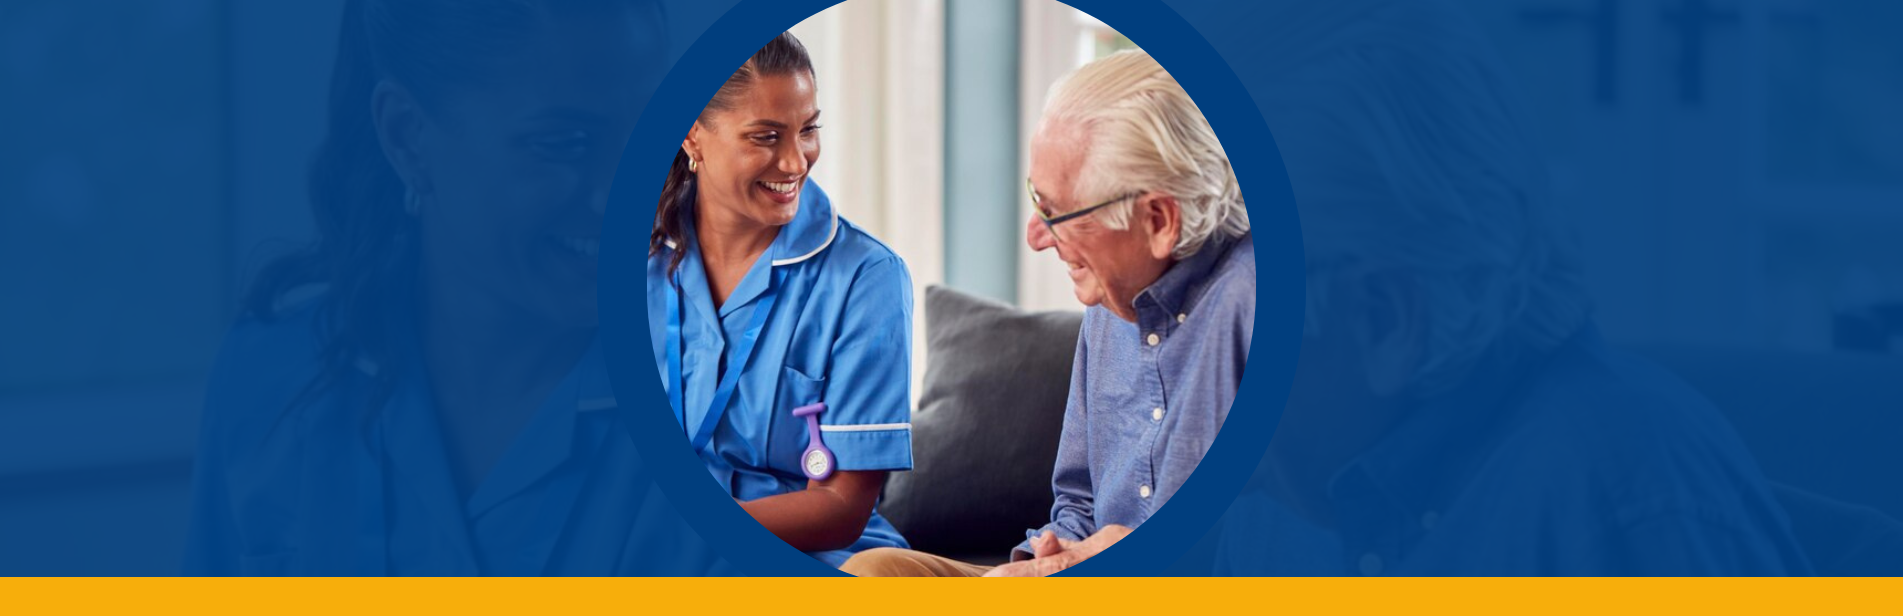 5 tips on finding the right homecare provider